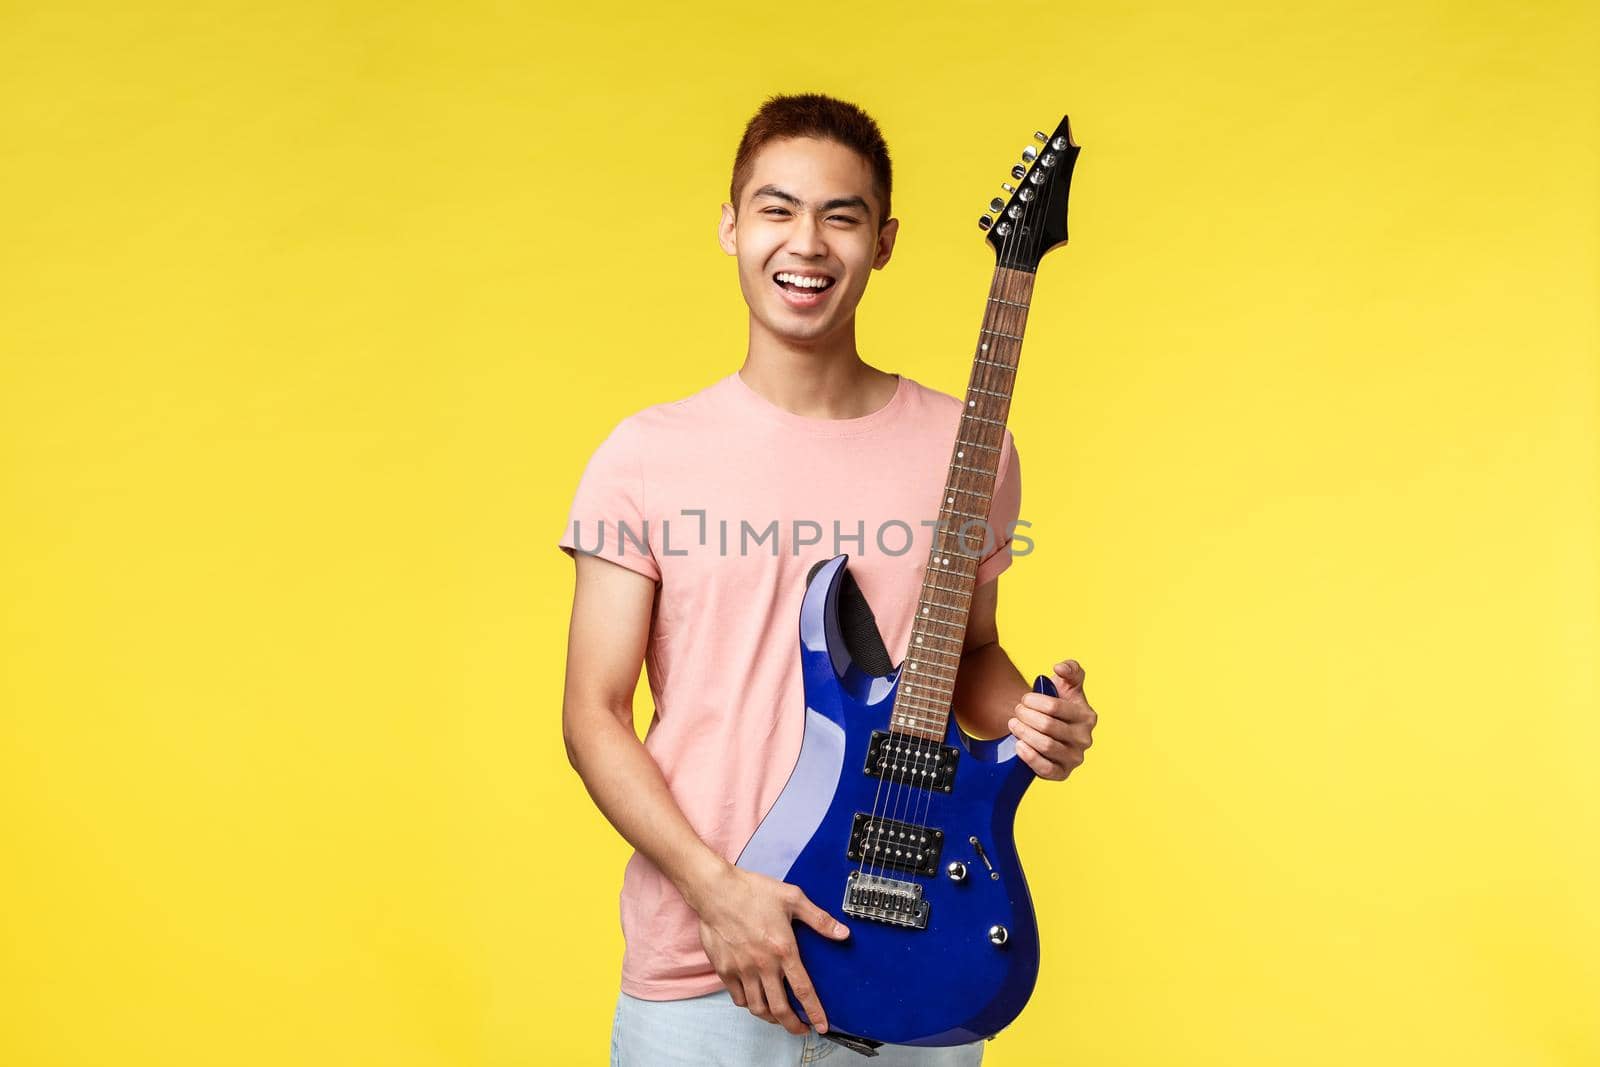 Lifestyle, leisure and youth concept. Enthusiastic handsome guy playing in band, got new electric guitar, laughing and smiling joyful, having fun performing on stage, yellow background.